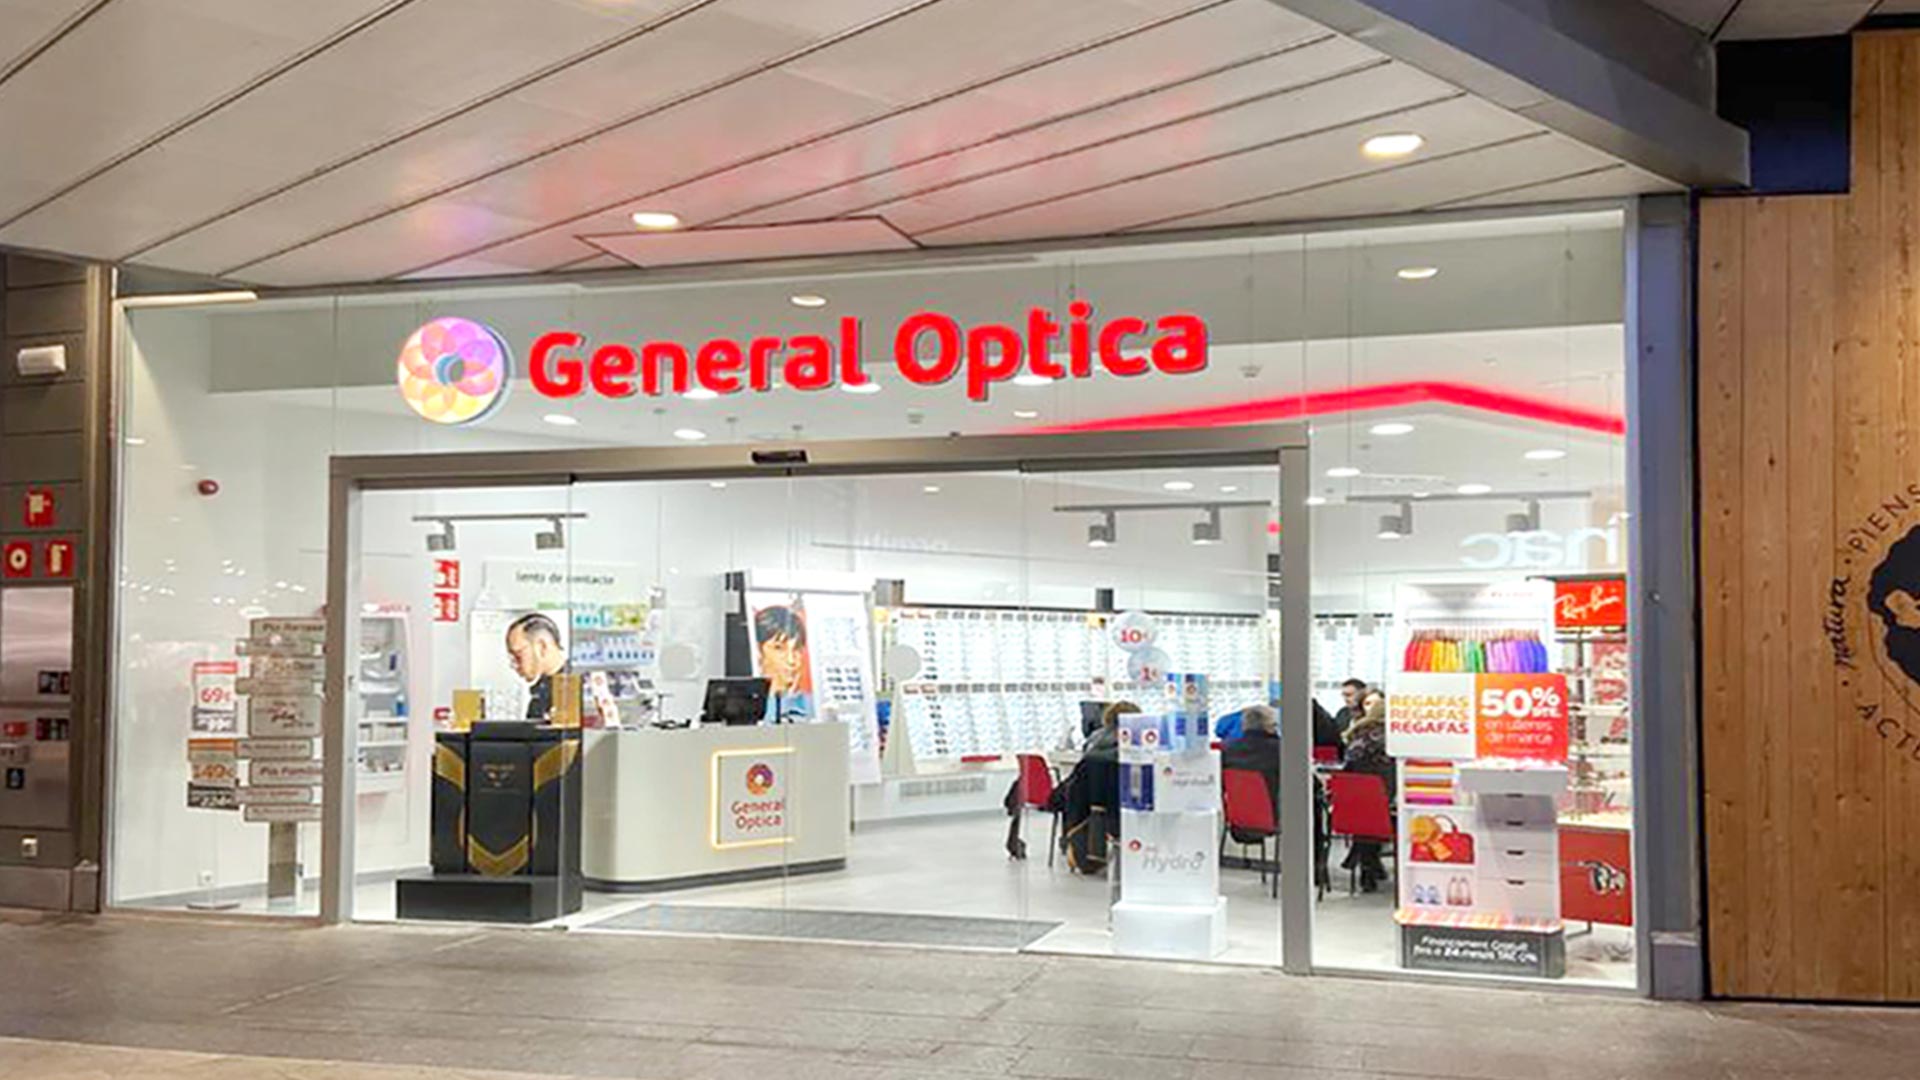 Implementation of General Óptica centres in Spain